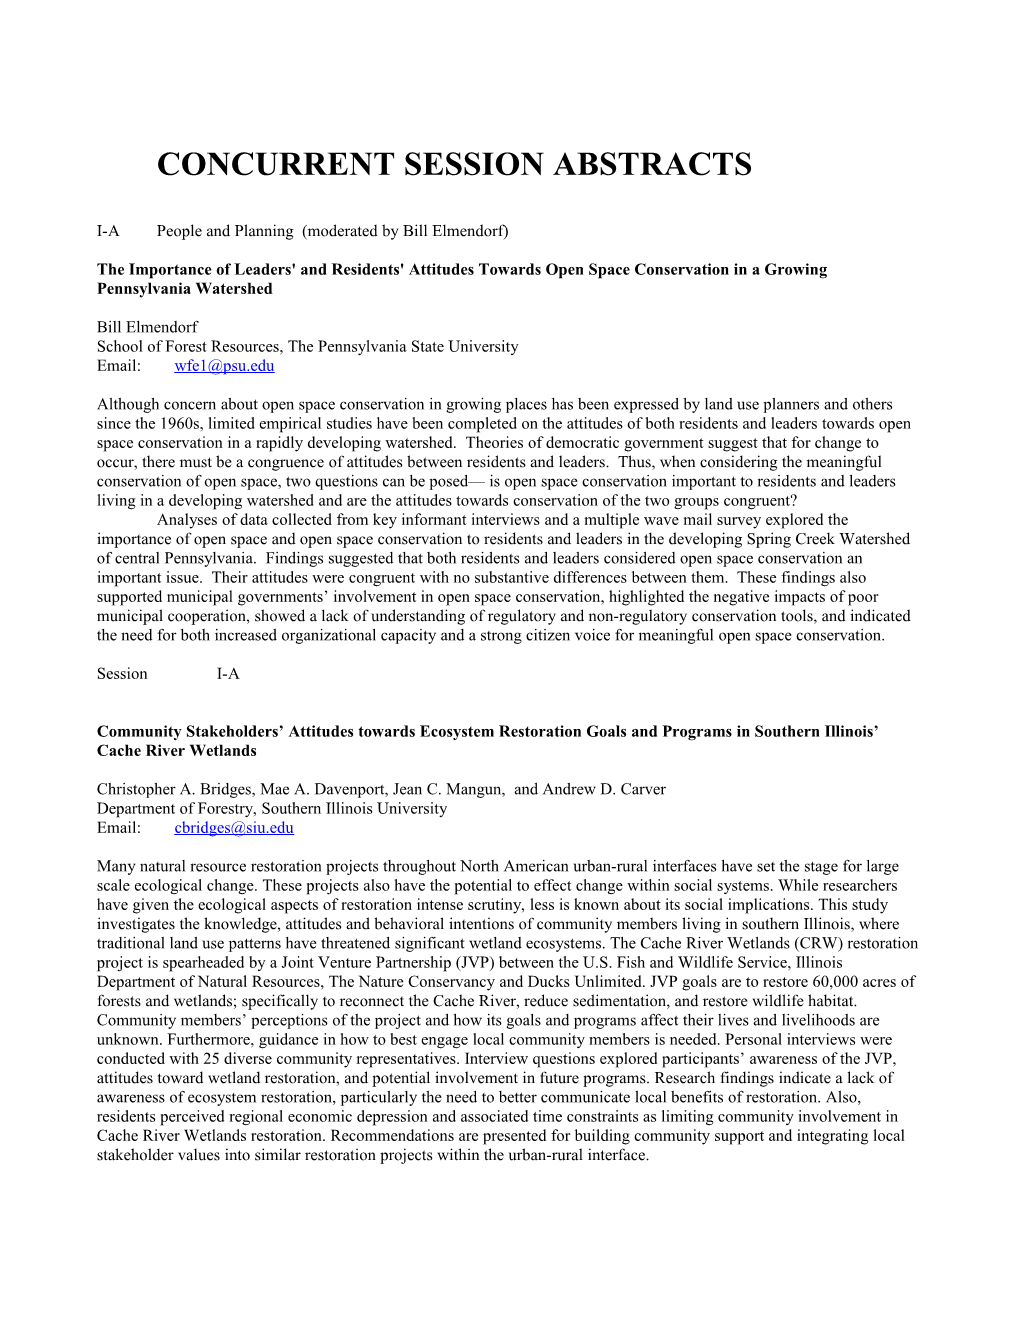 Concurrent Session Abstracts